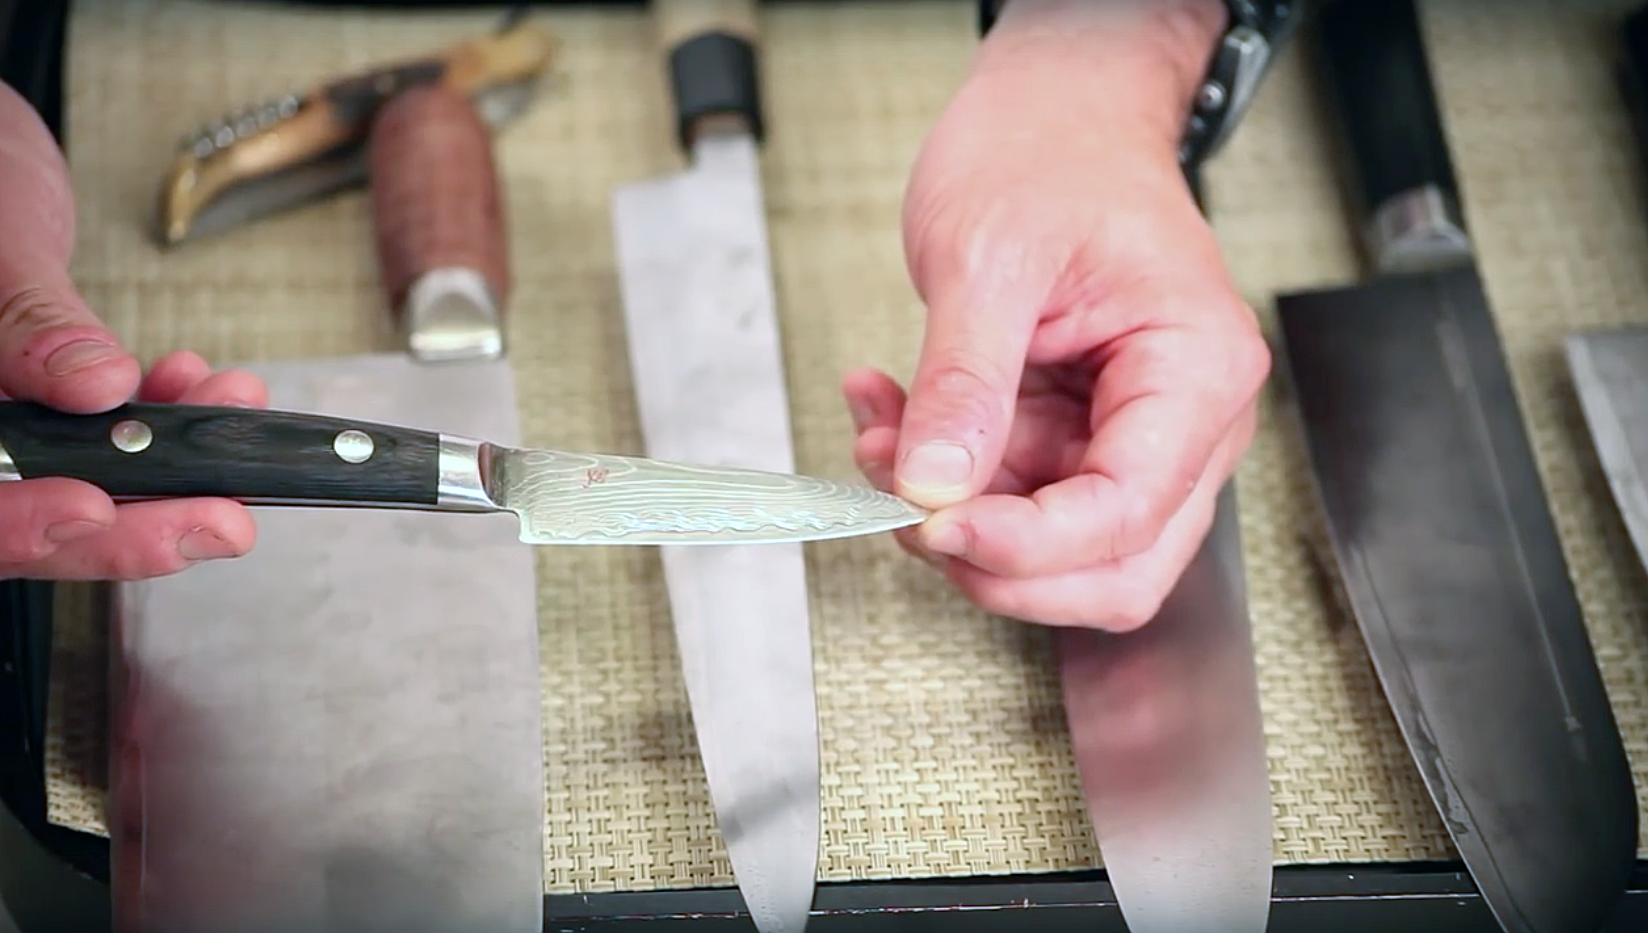 The best chef's knife is Anthony Bourdain's chef's knife